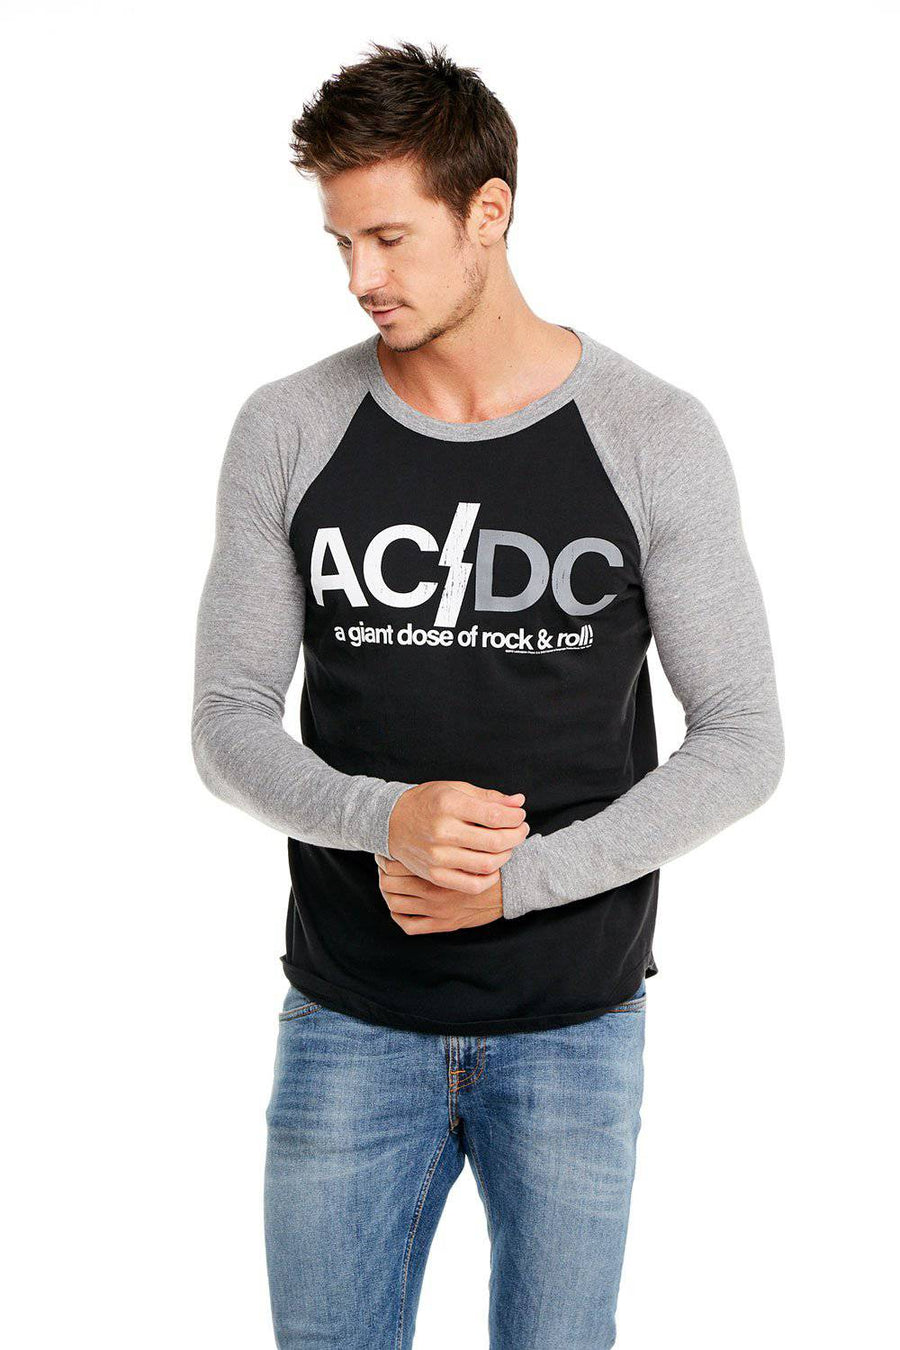 ACDC - DOSE OF ROCK & ROLL MENS chaserbrand